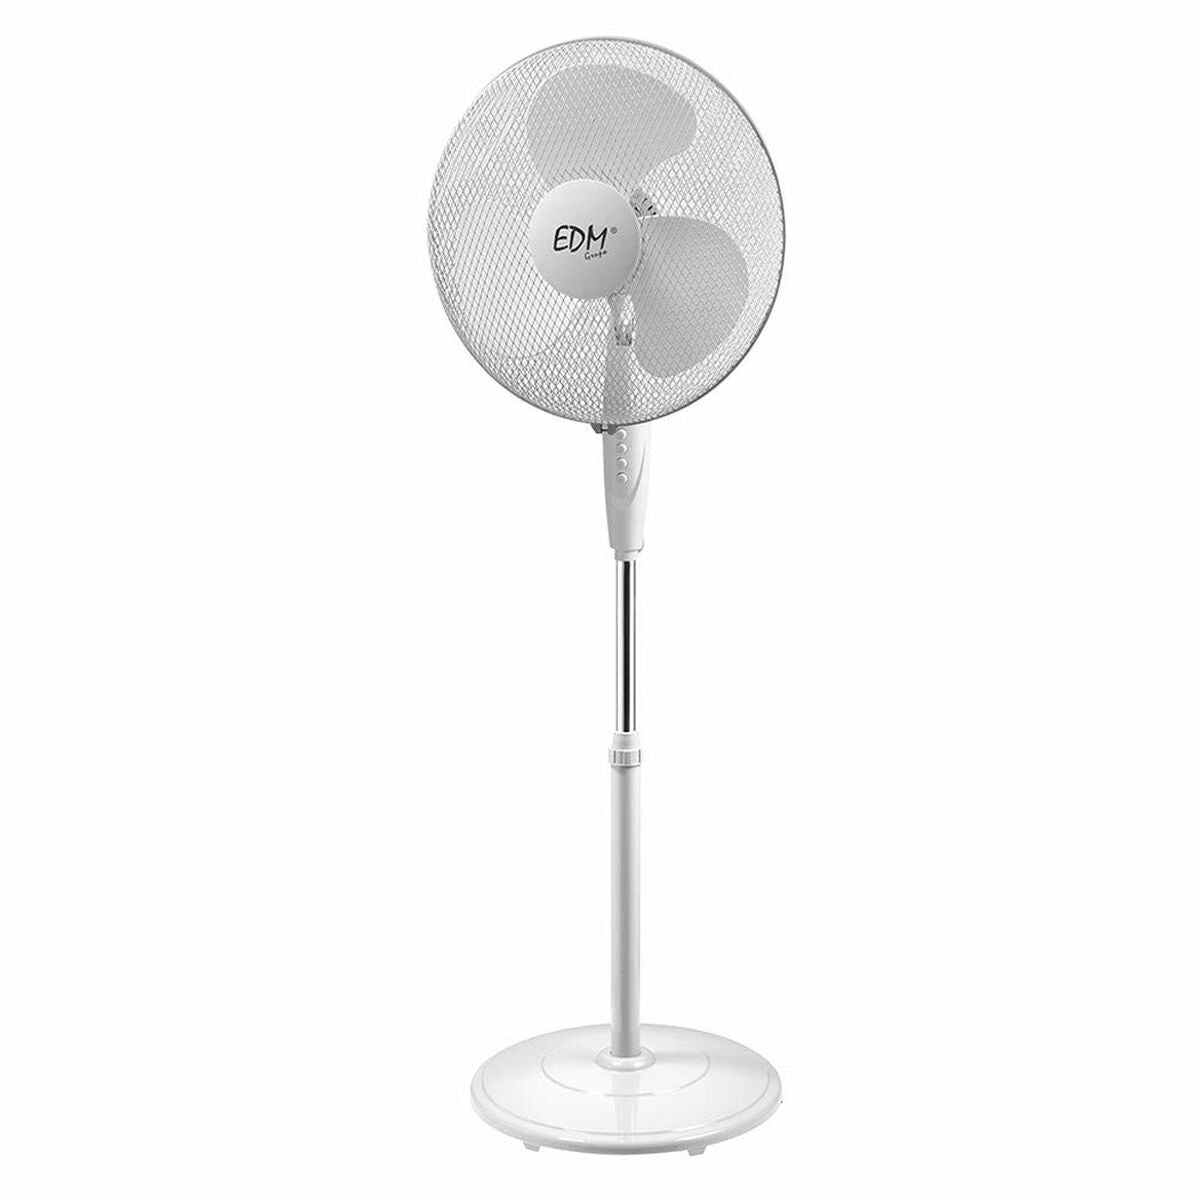 Freestanding Fan EDM White 45 W, EDM, Home and cooking, Portable air conditioning, freestanding-fan-edm-white-45-w, Brand_EDM, category-reference-2399, category-reference-2450, category-reference-2451, category-reference-t-19656, category-reference-t-21087, category-reference-t-25217, Condition_NEW, ferretería, Price_50 - 100, summer, RiotNook